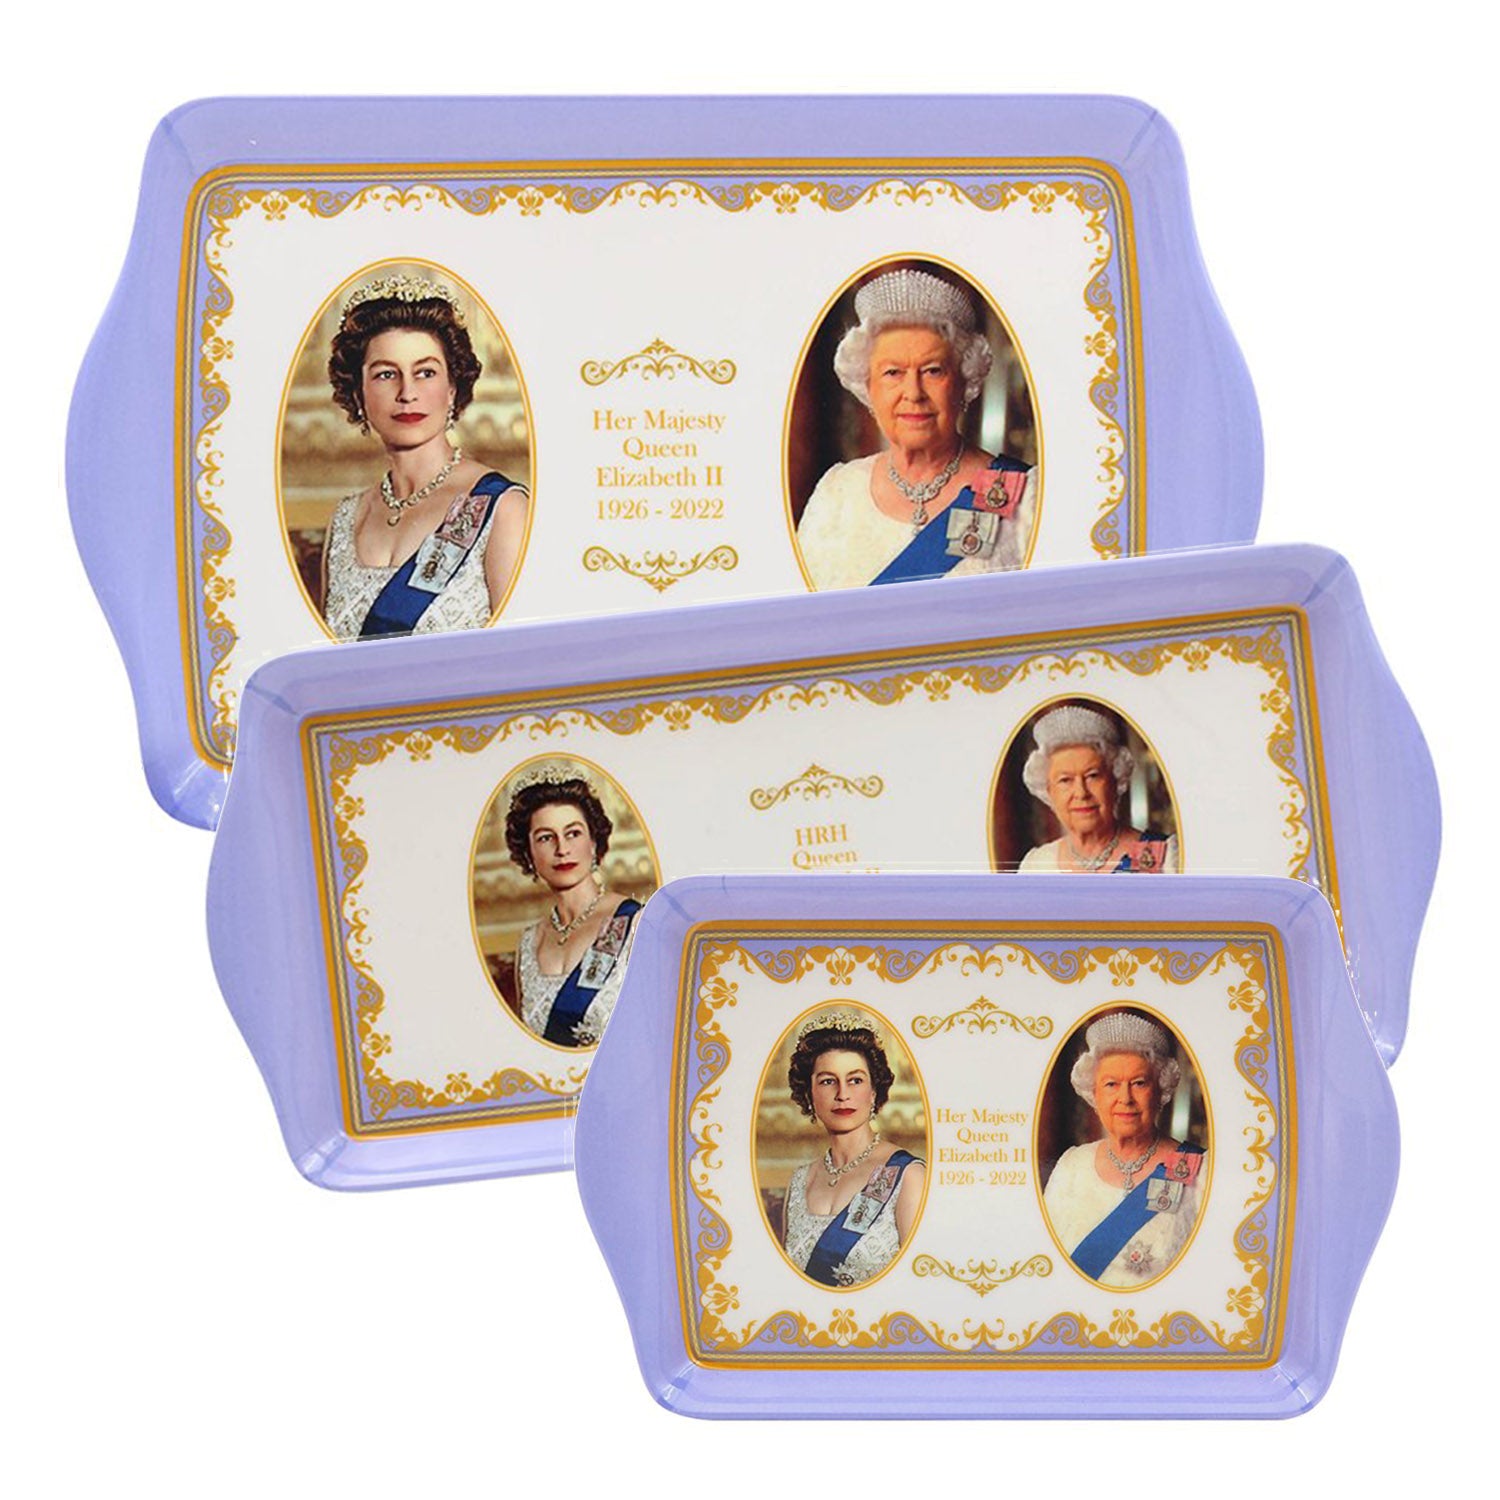 Queen Elizabeth II 3pc Small/Med/Large Serving Trays Her Majesty Commemorative